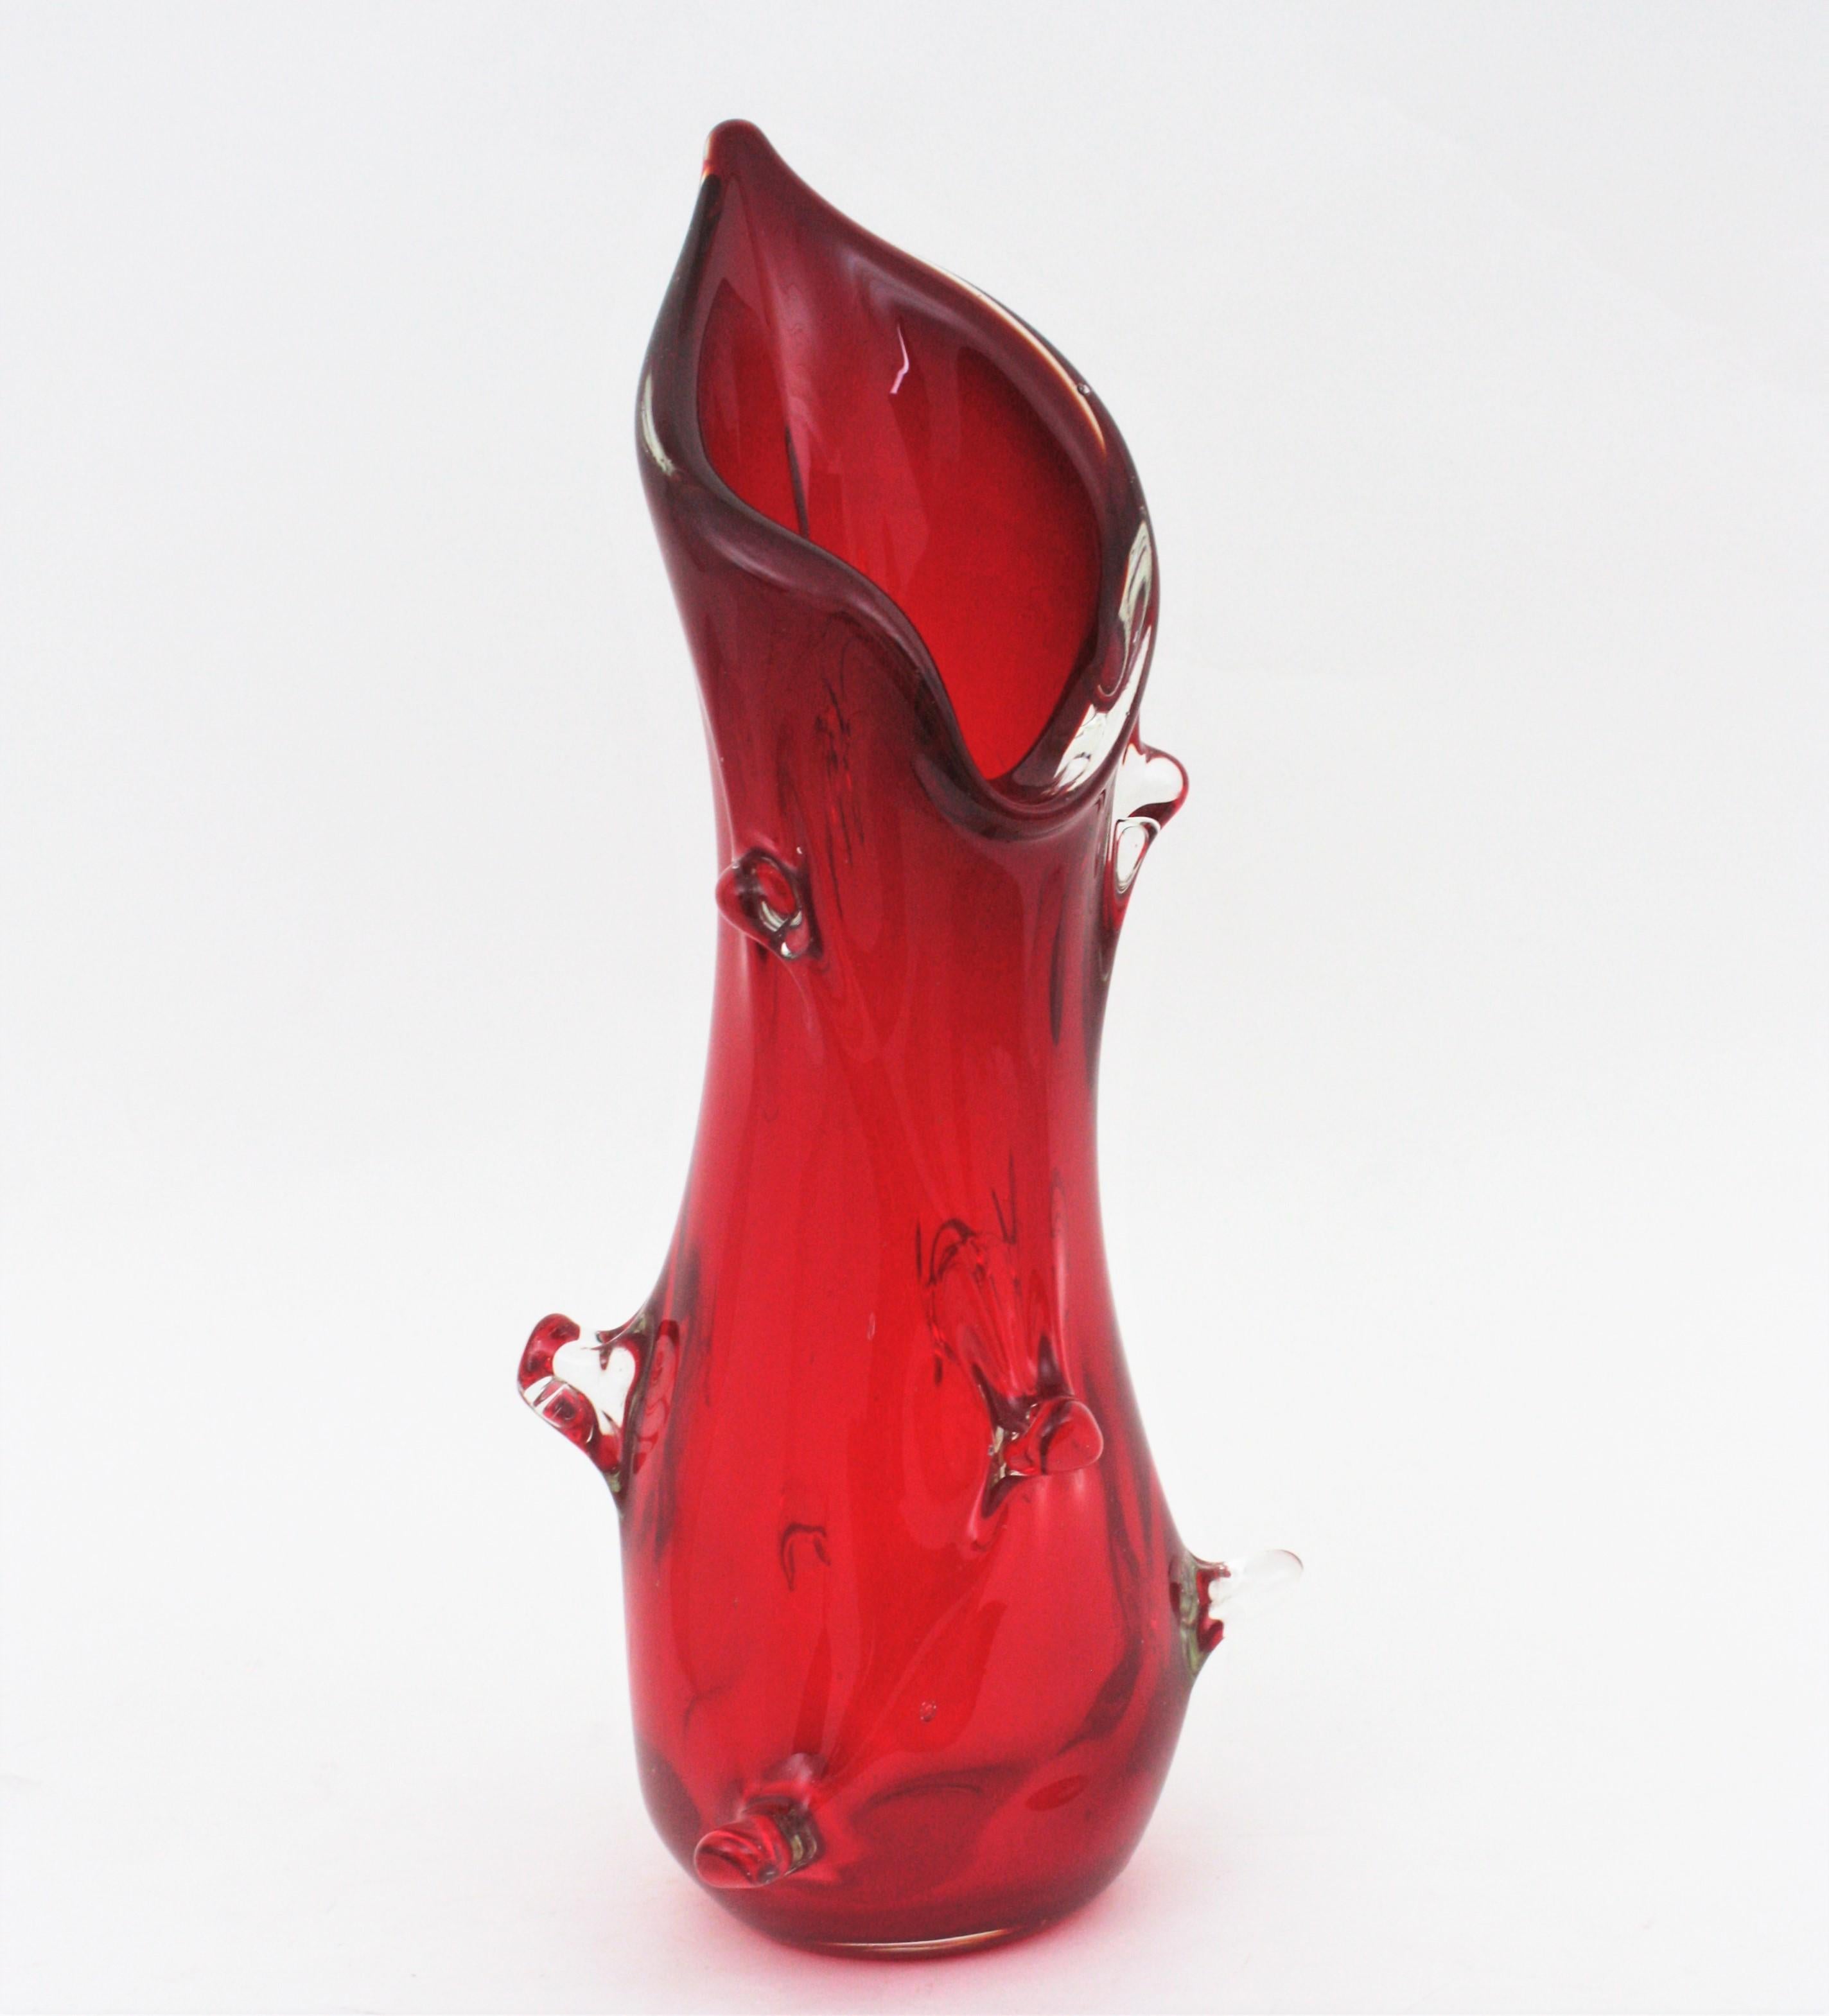 Archimede Seguso Murano Sommerso Red Iridiscent Art Glass Vase, 1960s In Good Condition For Sale In Barcelona, ES